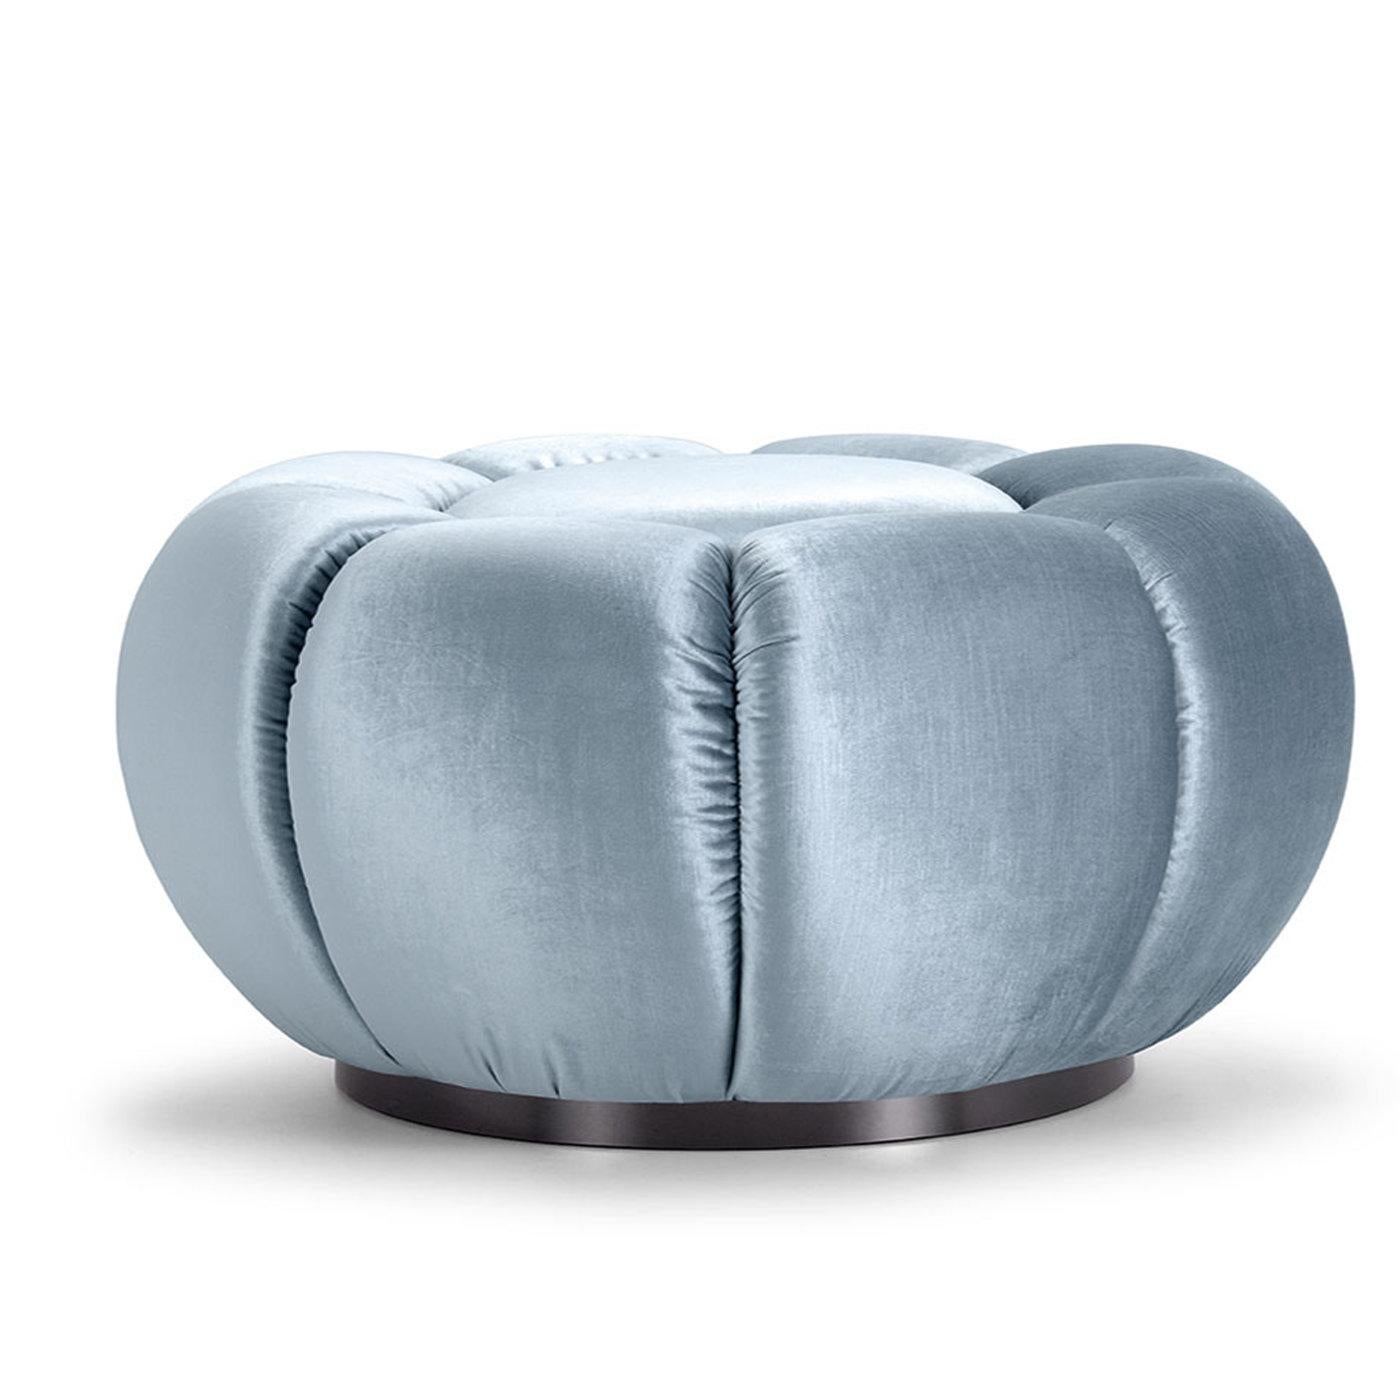 Recalling the appearance of flower buds, this handcrafted, circular pouf belongs to a sophisticated collection inspired by Arke, Greek mythological goddess and messenger of the Titans. The channeled texure given to the seat adds character to the